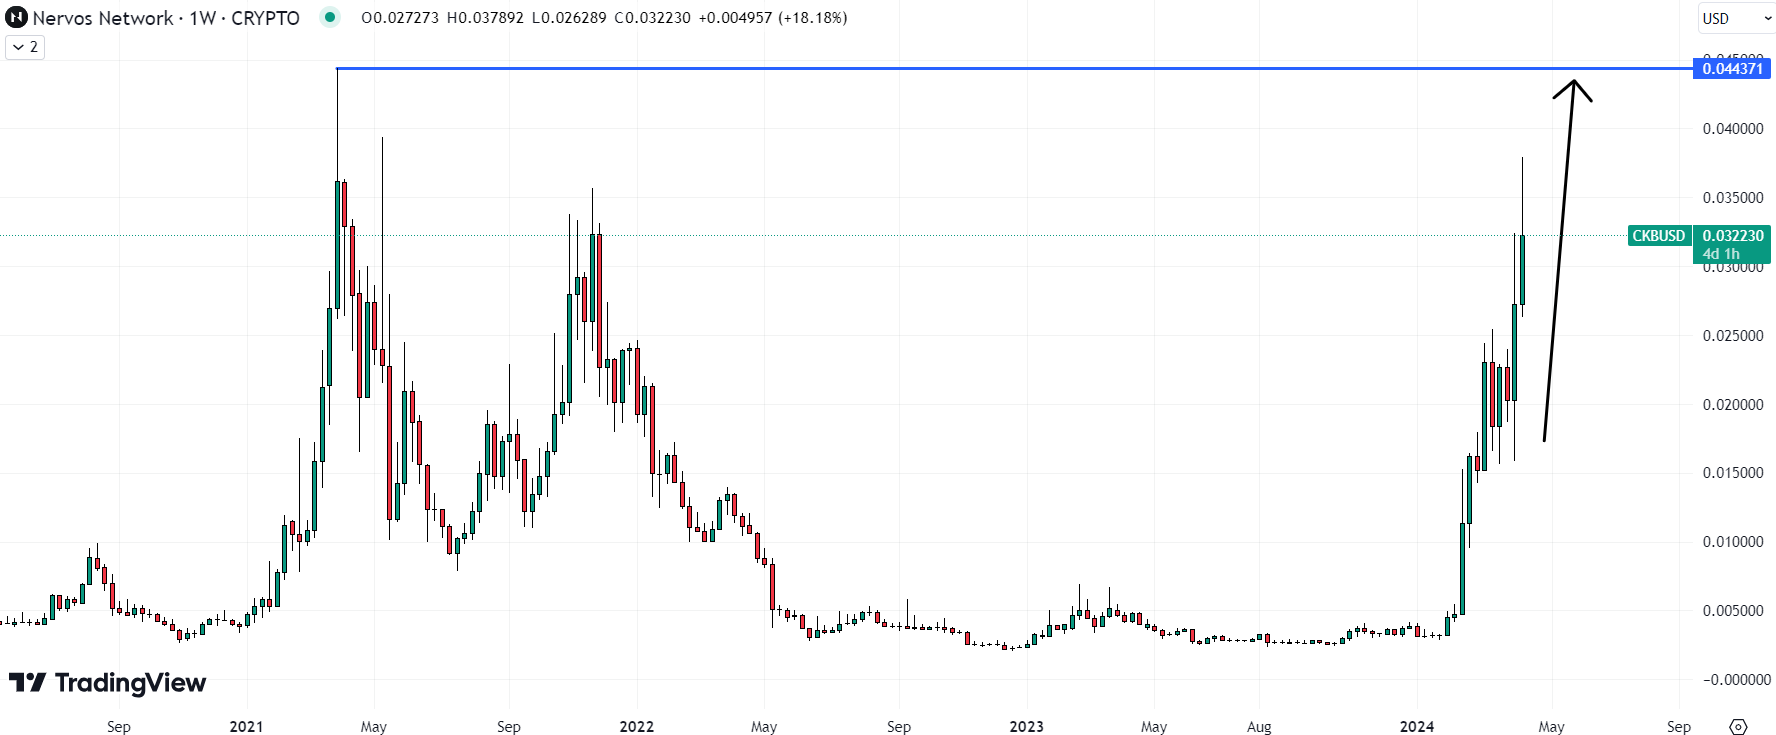 CKB could be the best crypto to buy now as is pumps quickly back to record highs. 